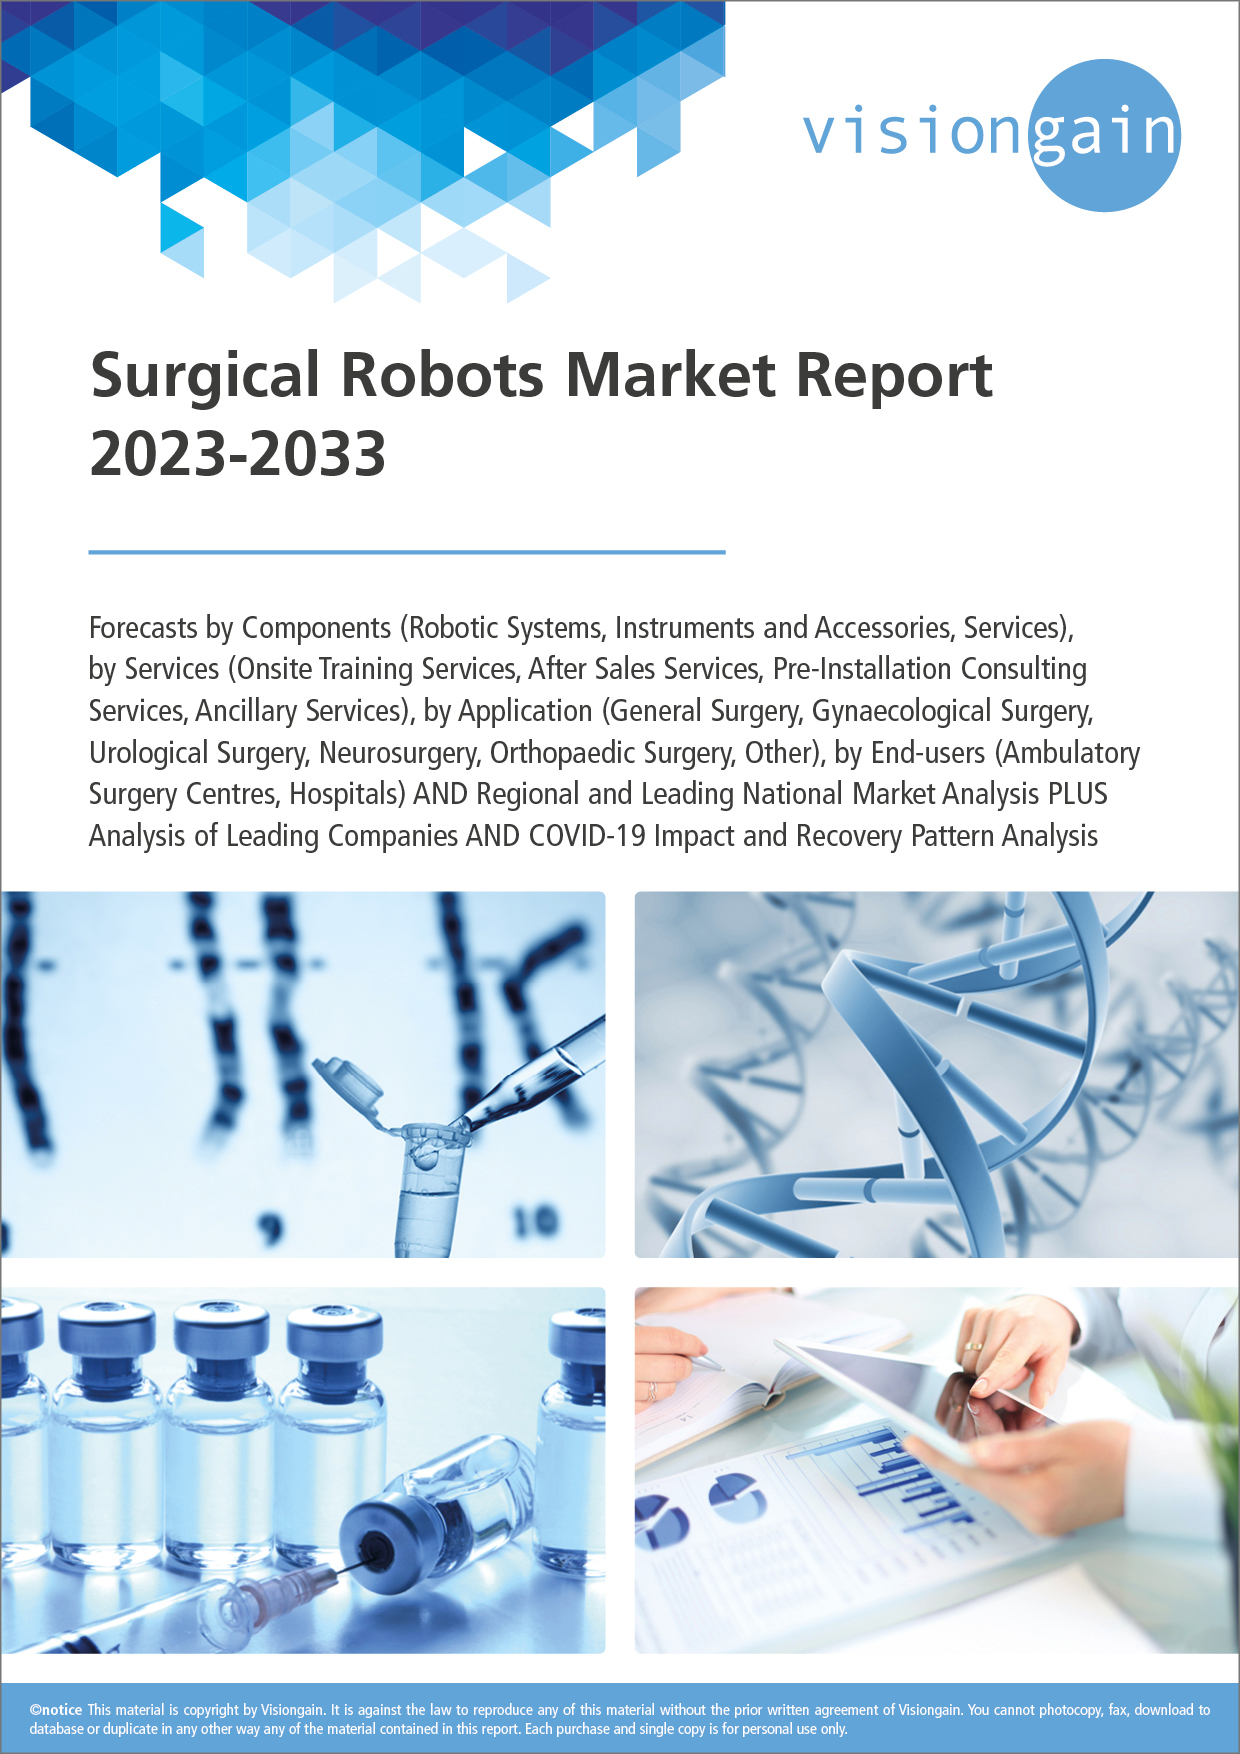 Surgical Glue Market Share & Growth Analysis By 2031